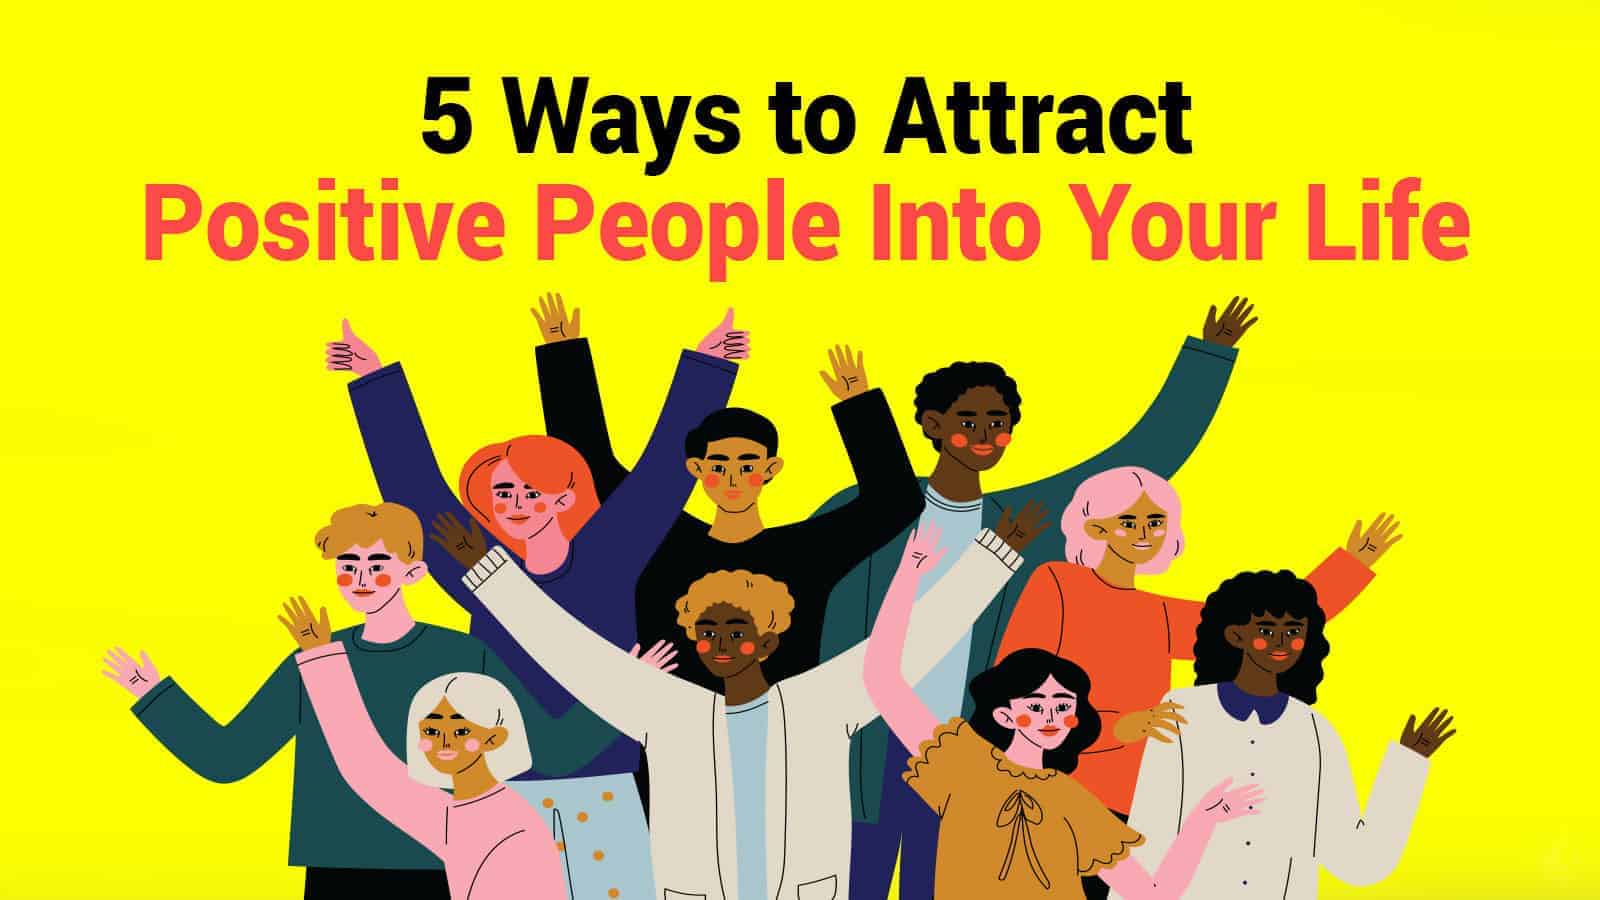 5 Ways to Attract Positive People Into Your Life